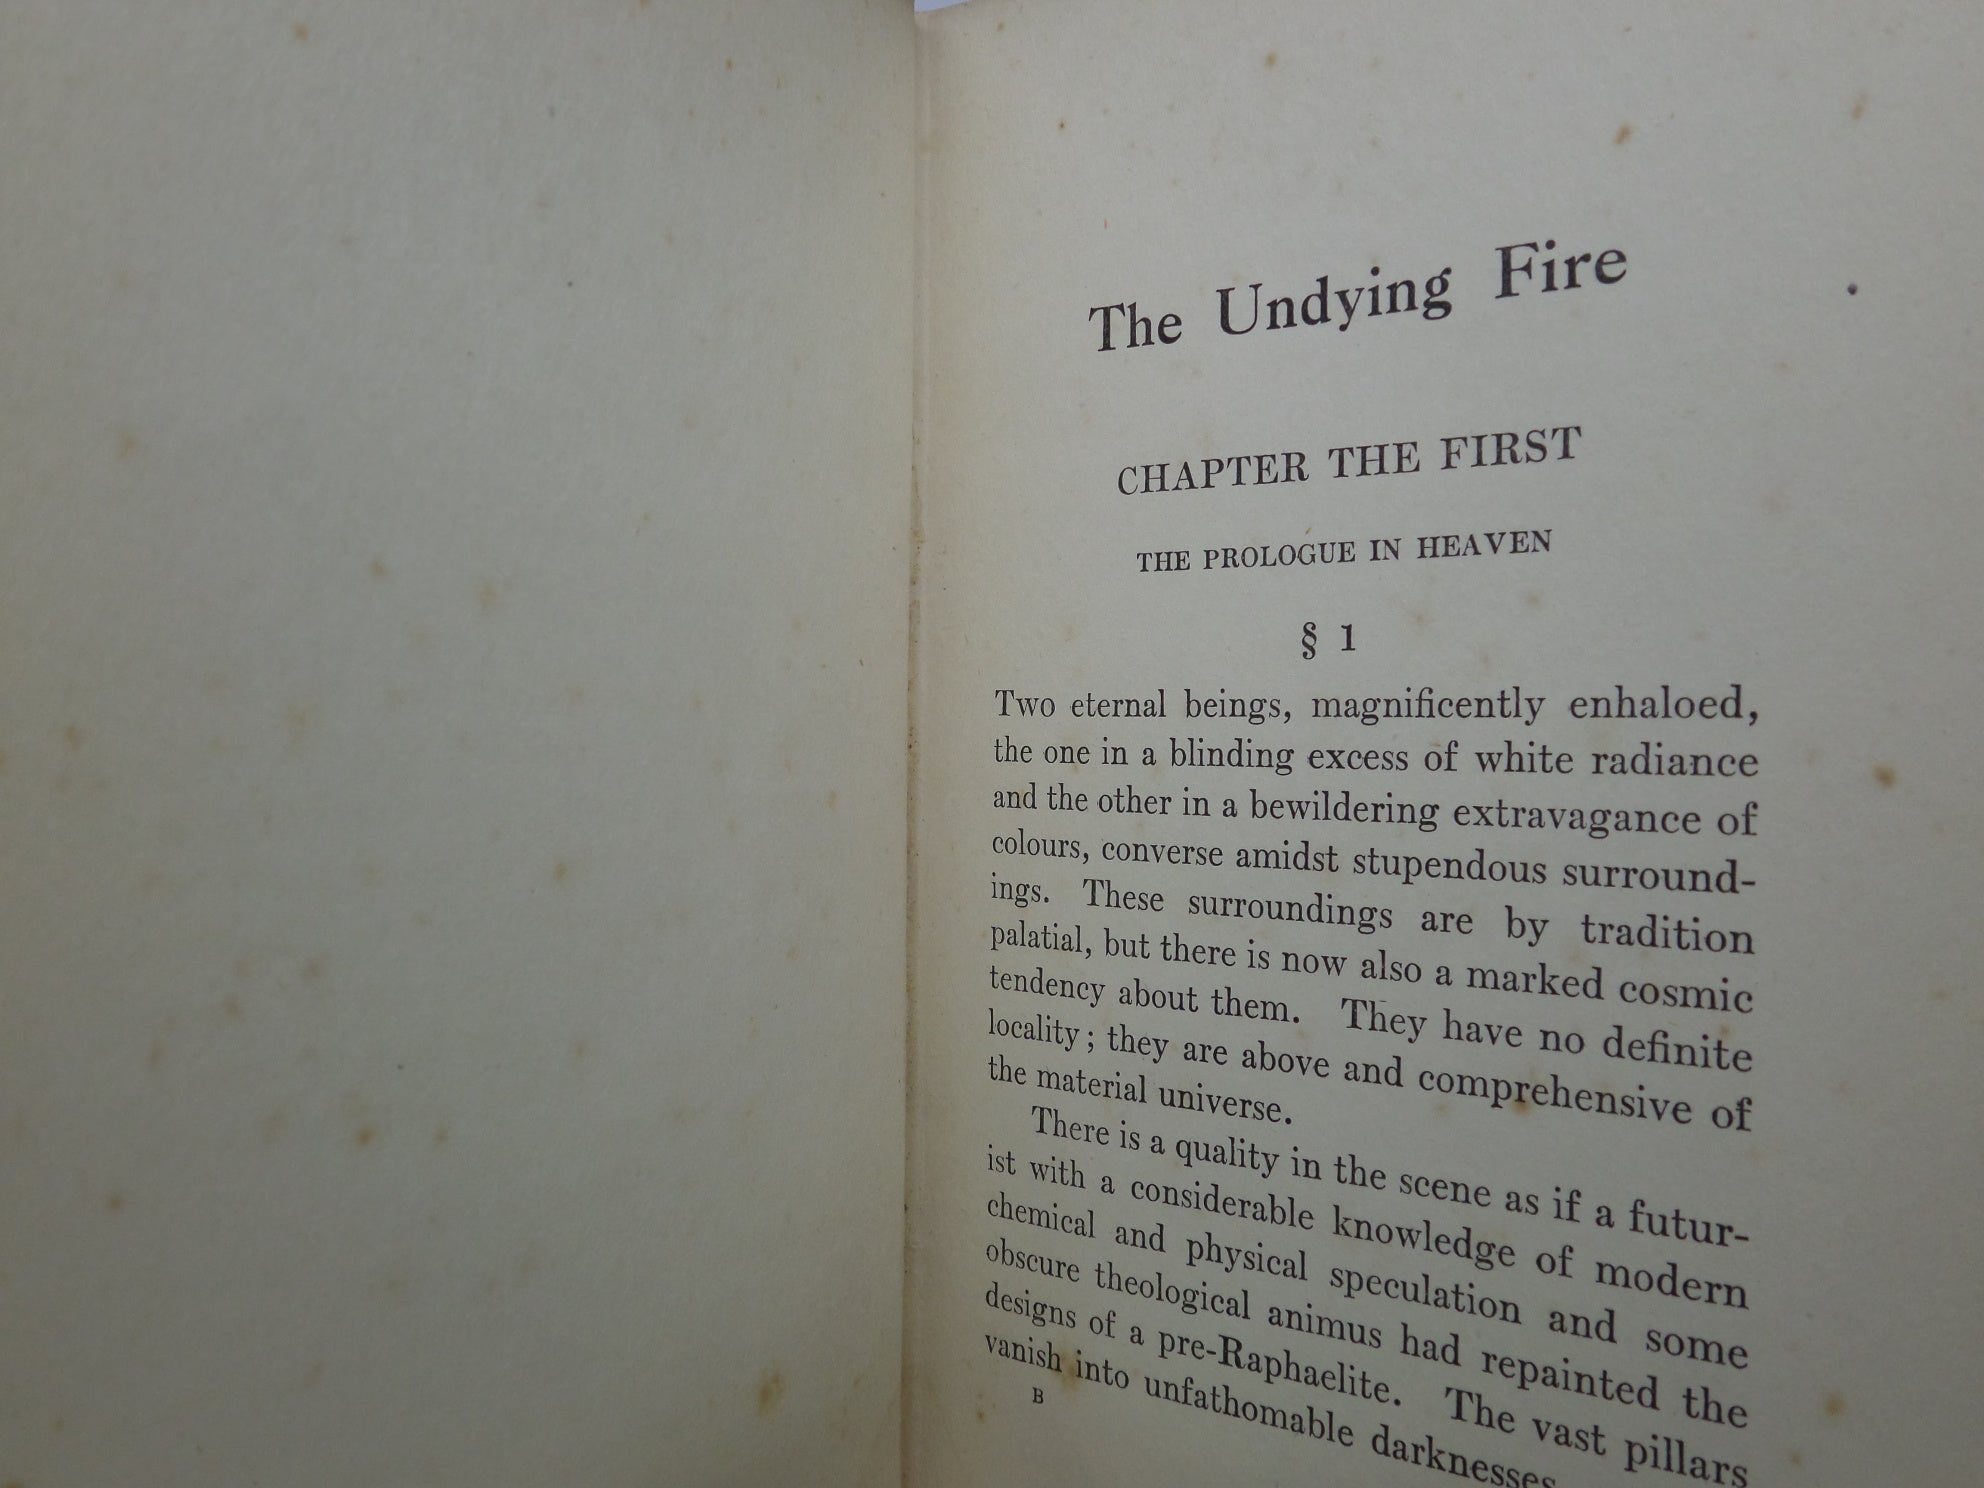 THE UNDYING FIRE BY H. G. WELLS 1919 SIGNED/ INSCRIBED FIRST EDITION HARDBACK